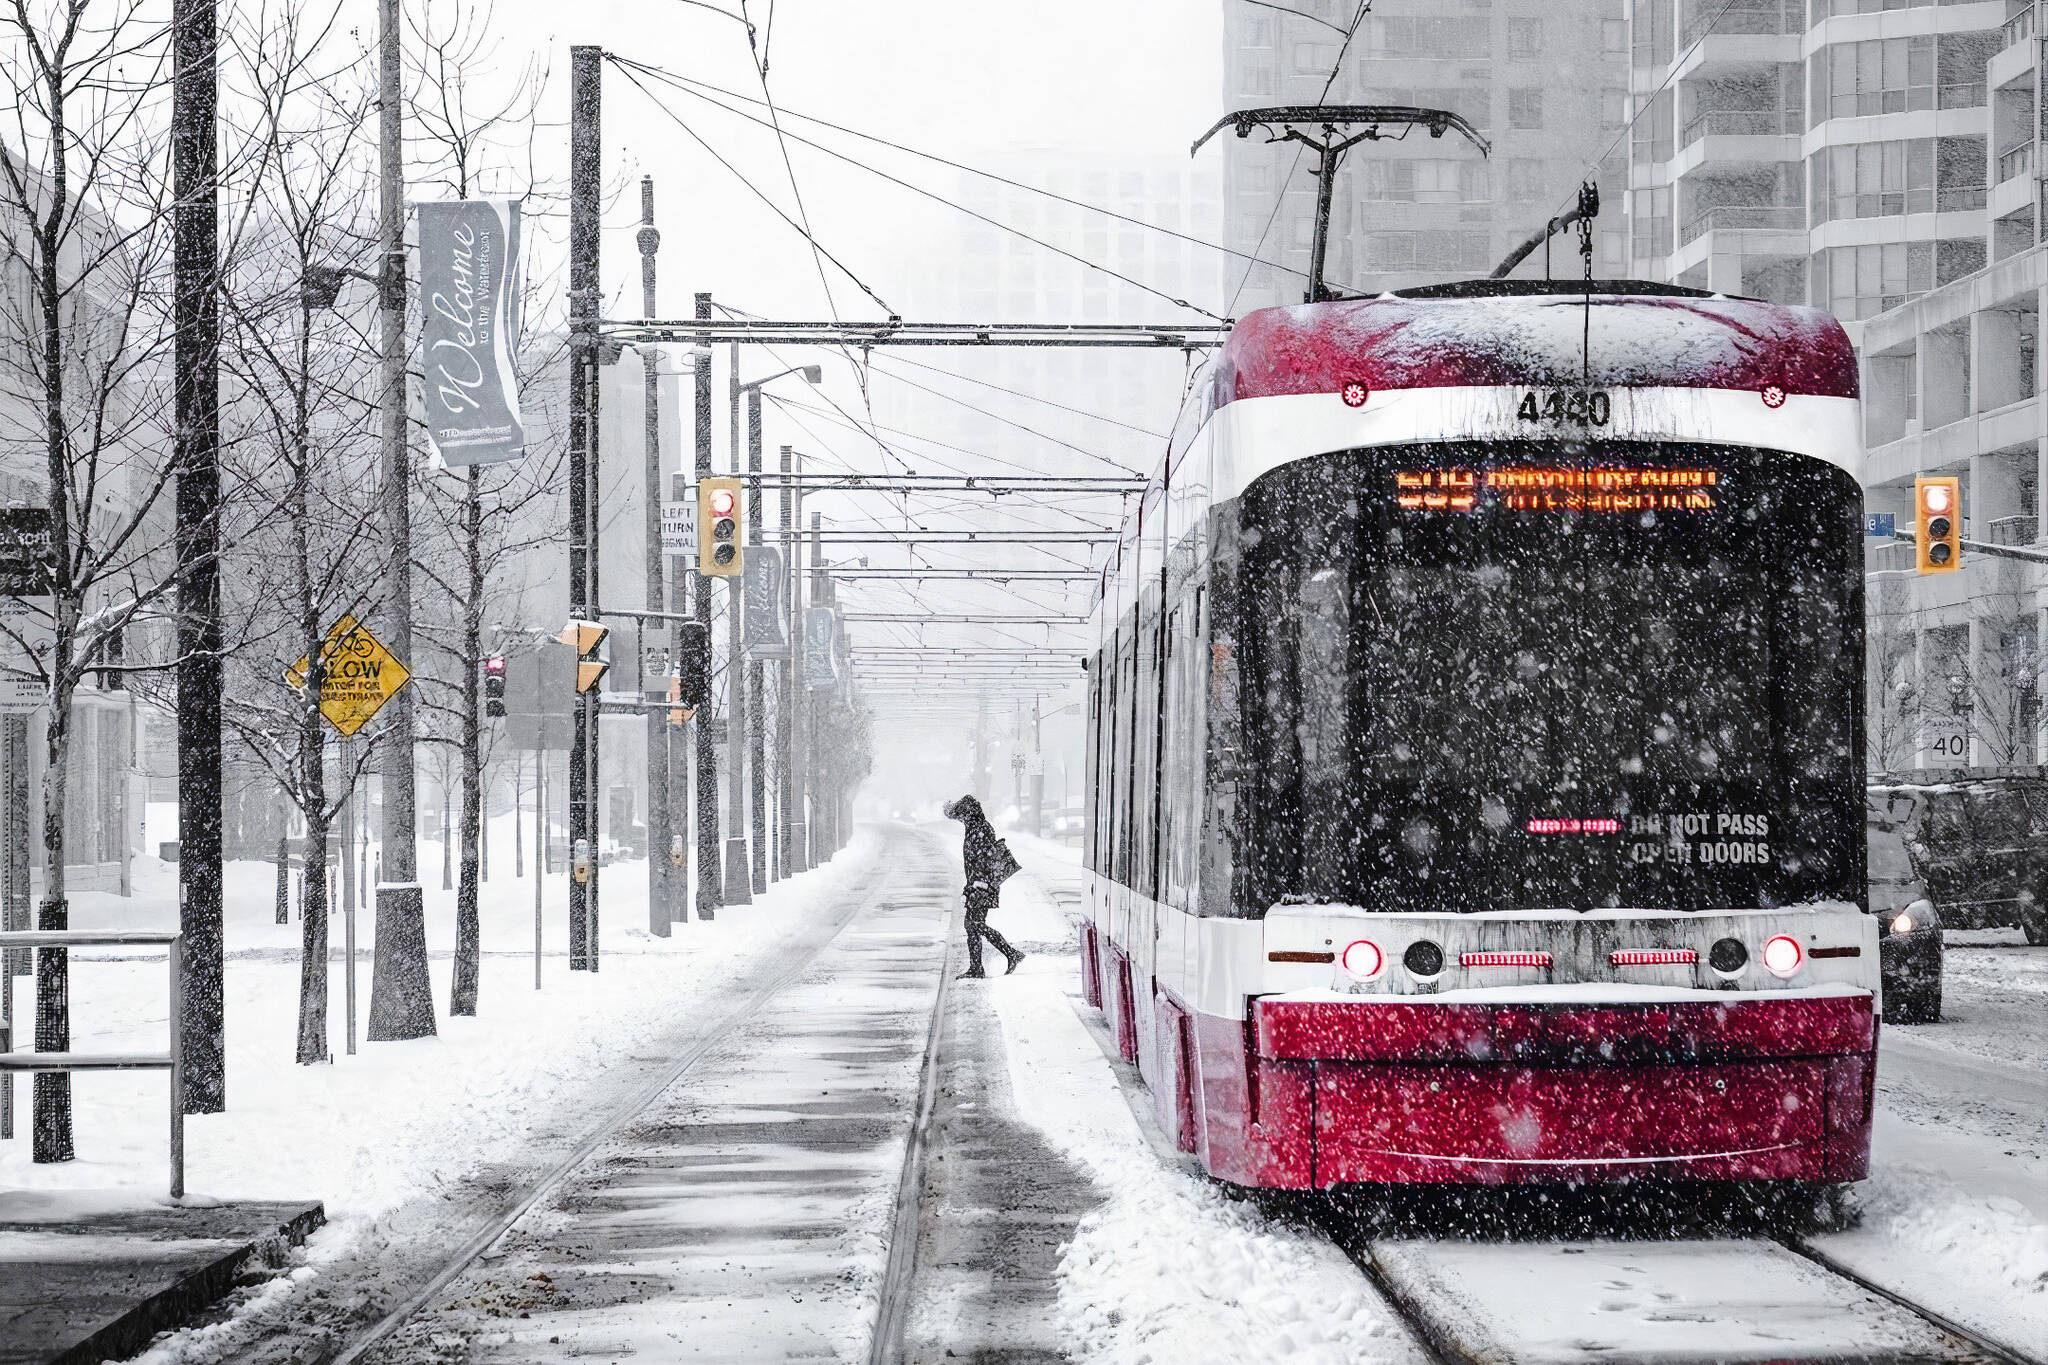 Environment Canada issues winter weather advisory over Toronto snow storm